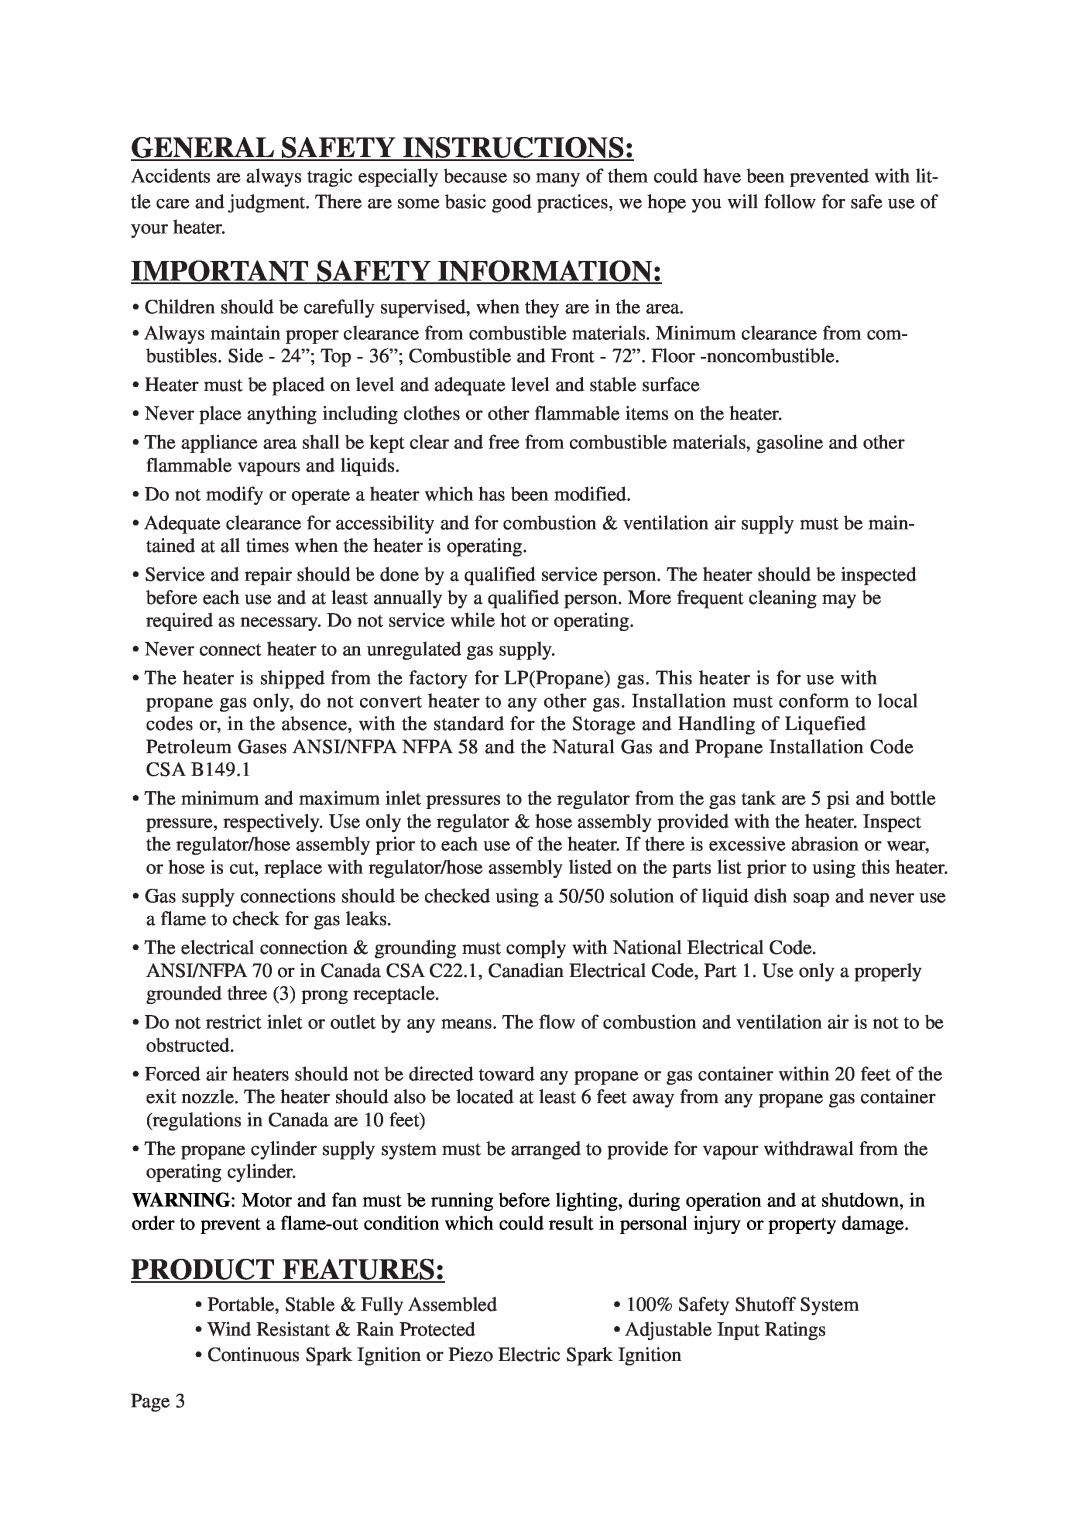 Vermont Casting CSA 2.14-2000, ANSI Z83.7-2000 General Safety Instructions, Important Safety Information, Product Features 